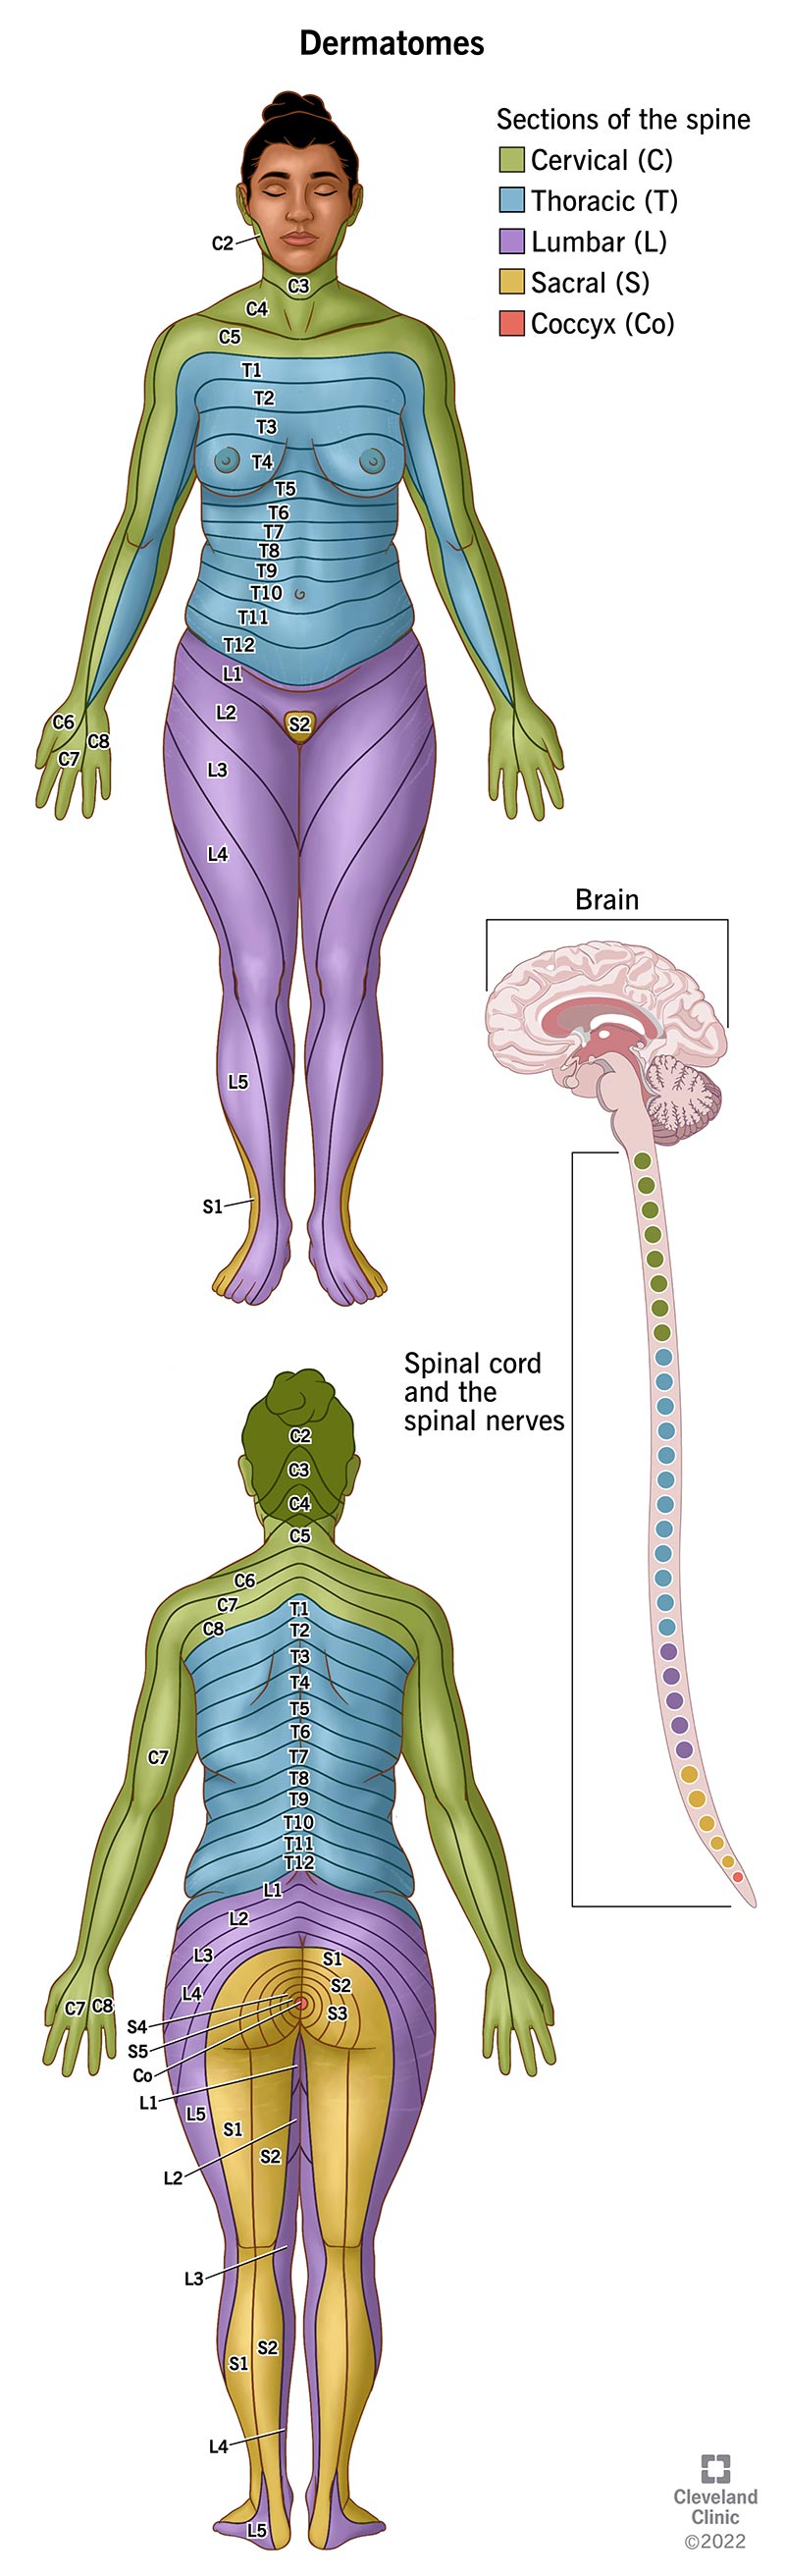 Dermatomes of your skin can serve as a map, providing clues to the location of spinal cord and spinal nerve injuries.